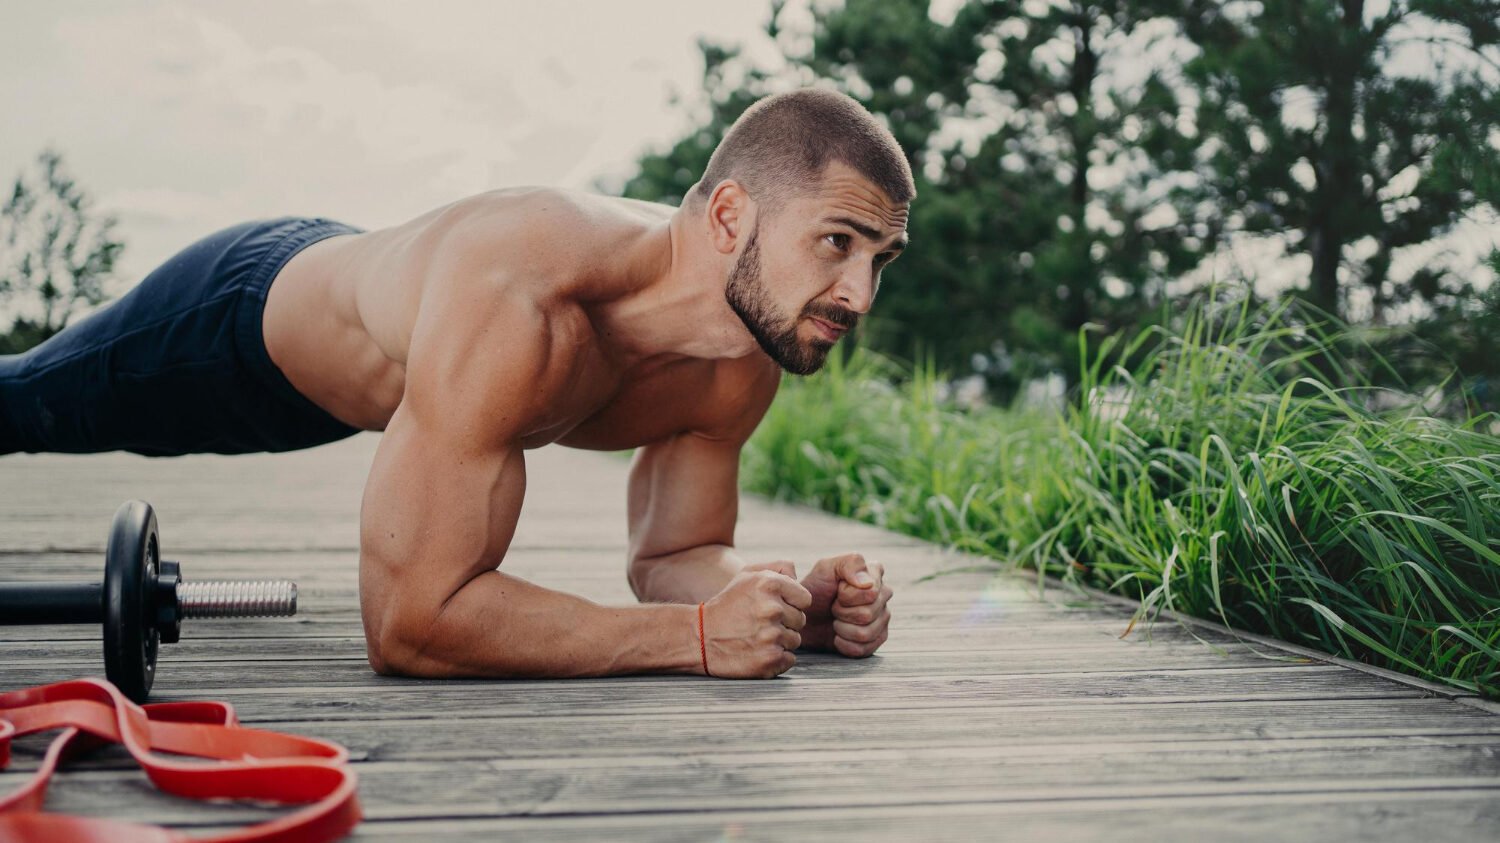 Muscular Bodybuilder Stands Plank Pose Demonstrates Endurance Has Strong Biceps Poses Outdoor Has Athletic Workout Poses Outdoor Keeps Good Physical Shape Man Doing Push Ups Concentared Forward